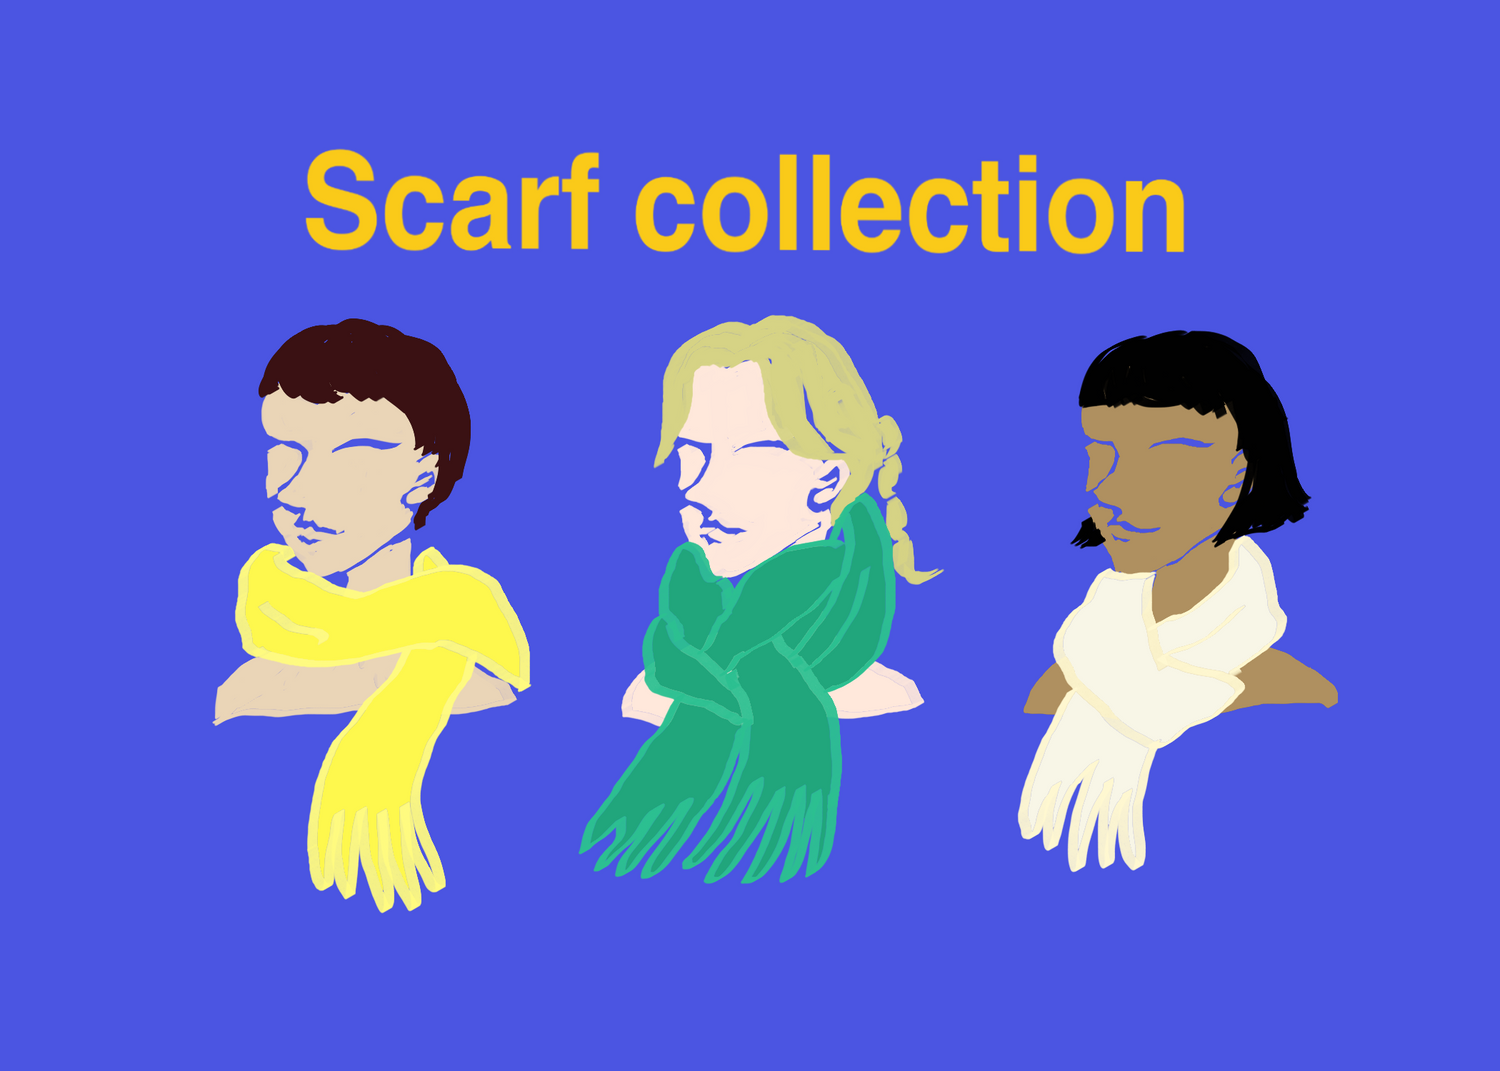 Scarf collection!